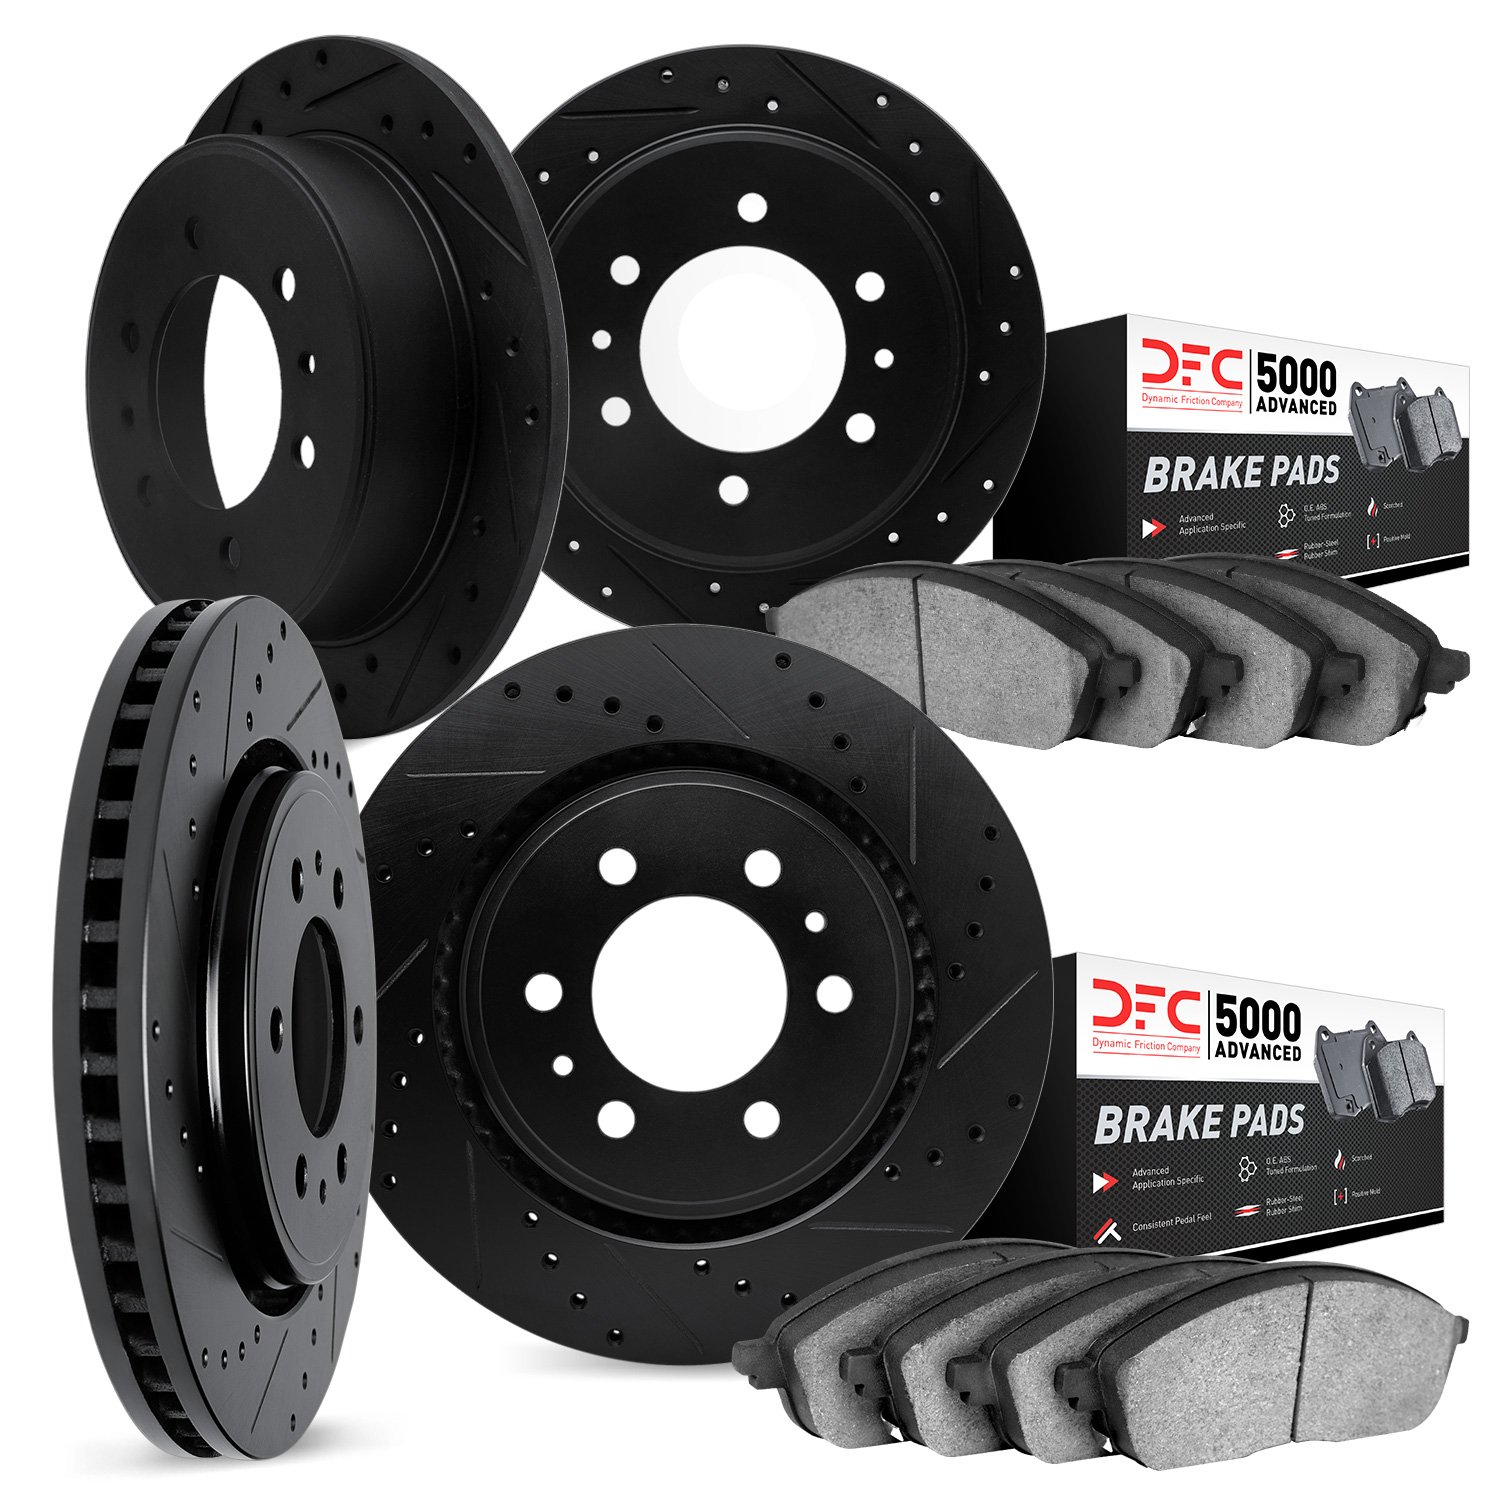 8504-72053 Drilled/Slotted Brake Rotors w/5000 Advanced Brake Pads Kit [Black], 1994-2000 Mitsubishi, Position: Front and Rear